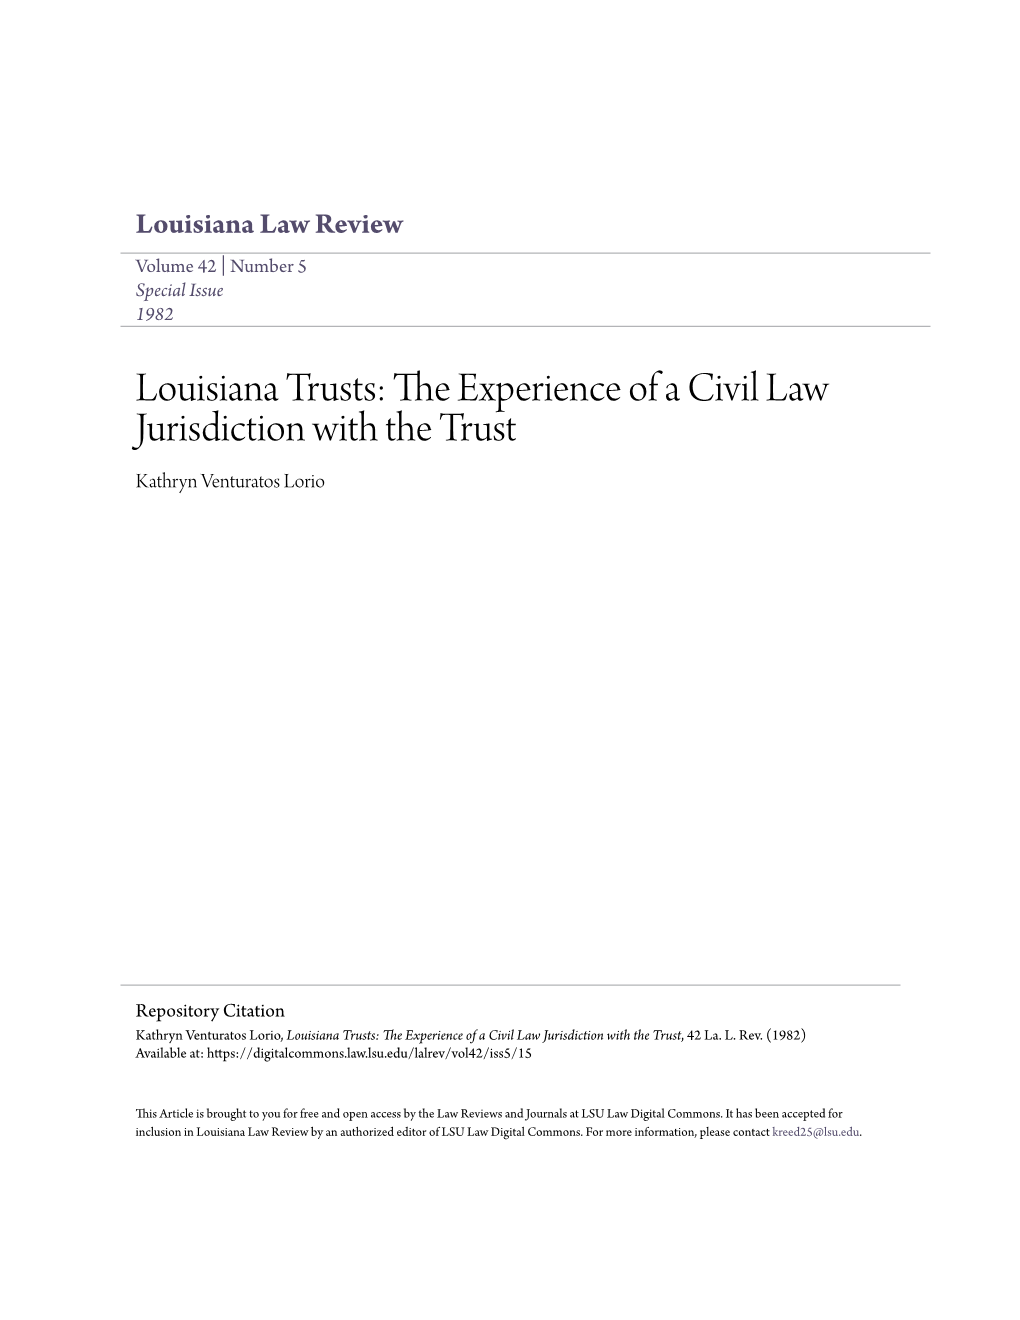 Louisiana Trusts: the Experience of a Civil Law Jurisdiction with the Trust Kathryn Venturatos Lorio